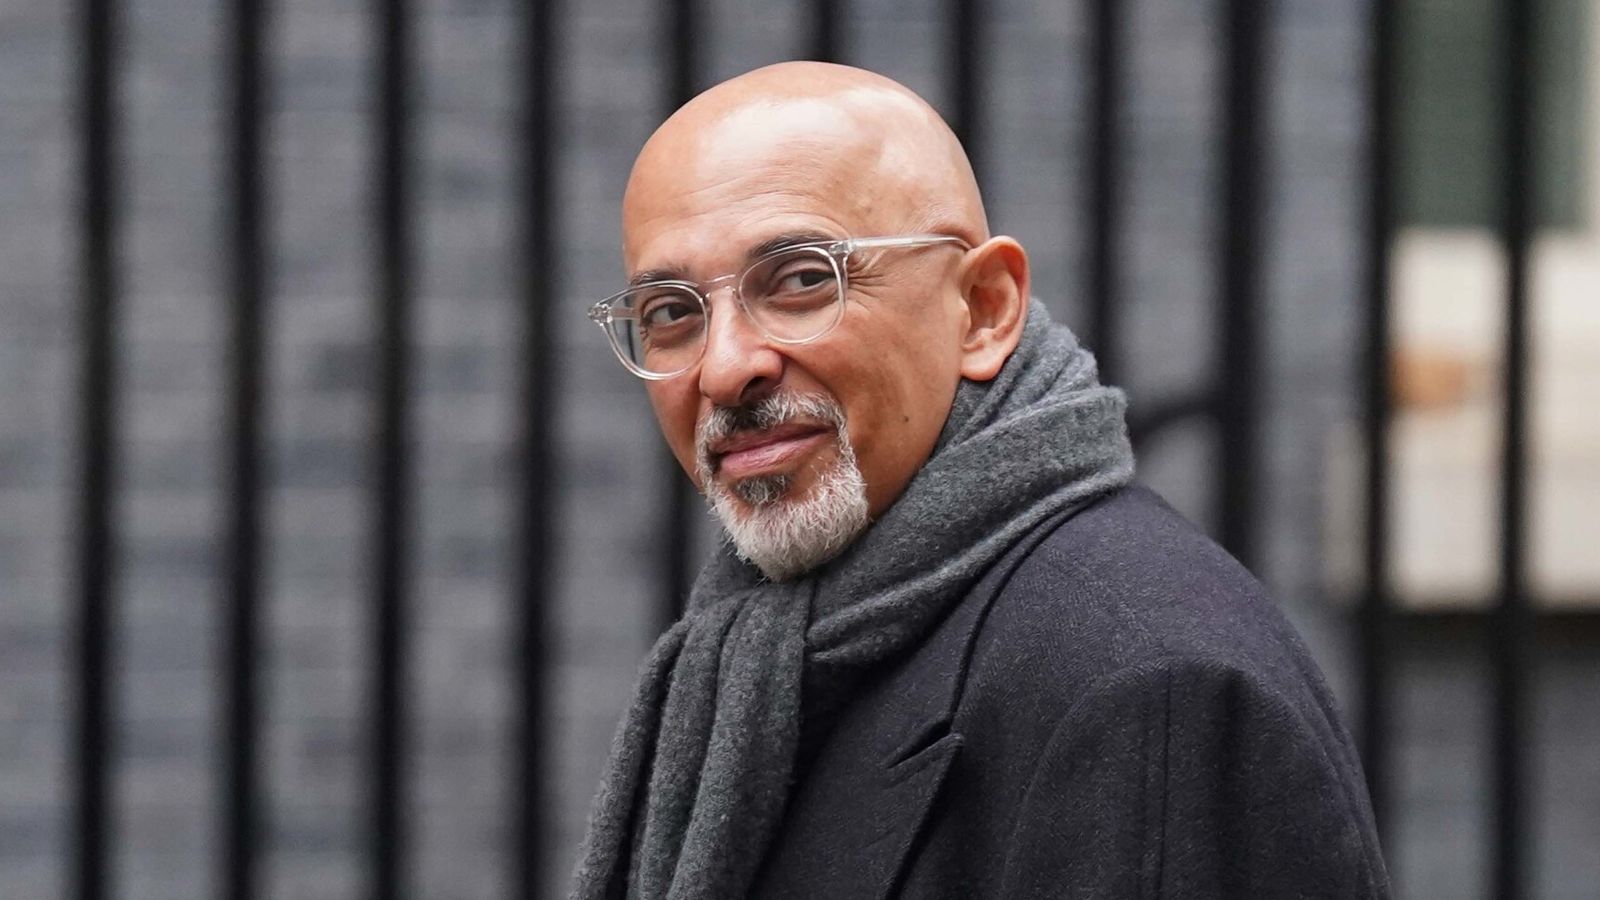 Nadhim Zahawi says HMRC concluded tax error was 'careless and not deliberate' after facing calls for his sacking